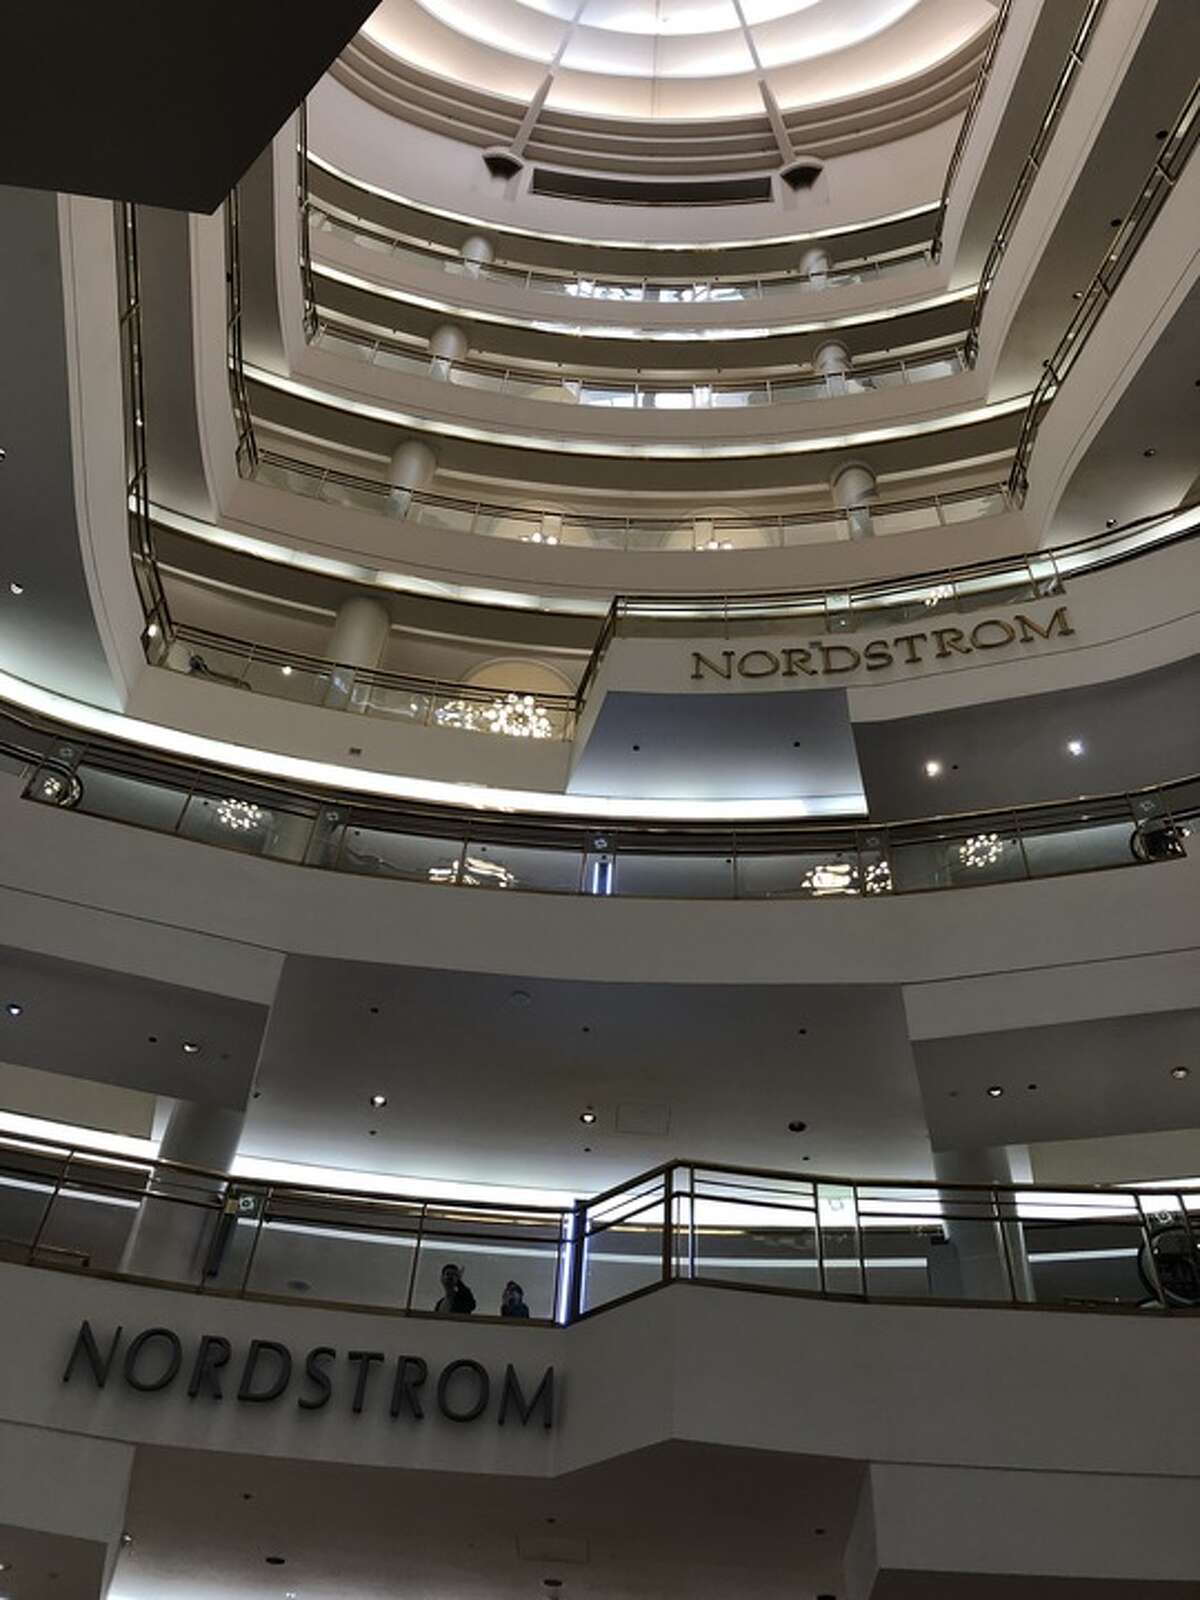 Nordstrom’s style, class captured the essence of S.F. We will miss it